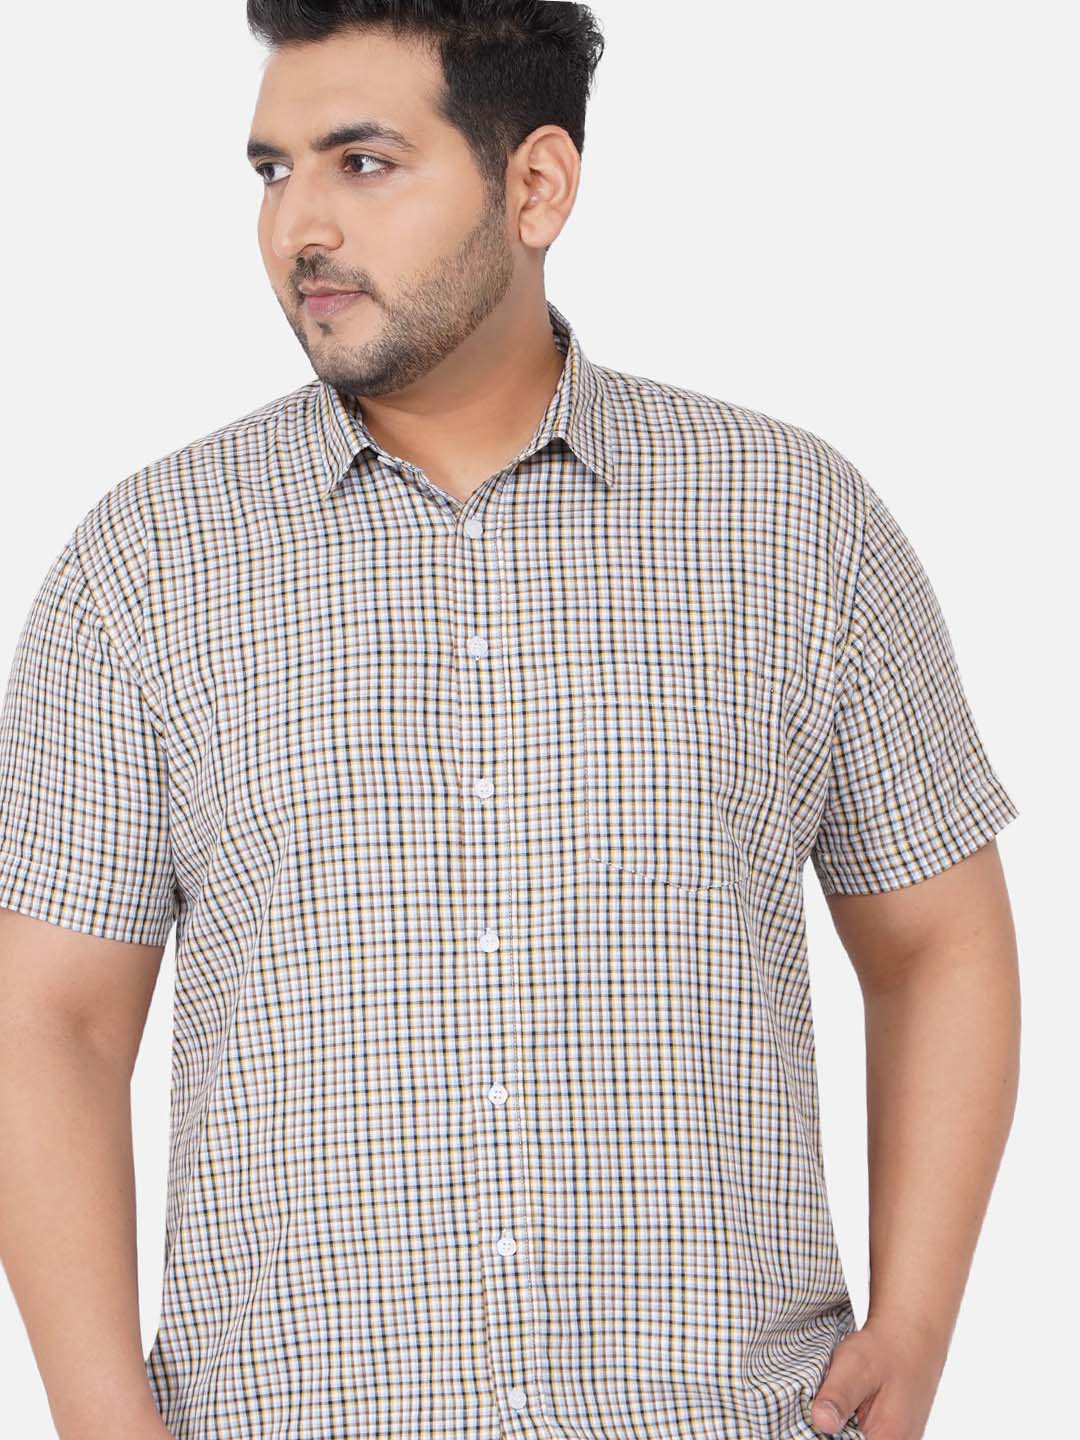 The Beige Chequered - Shirt